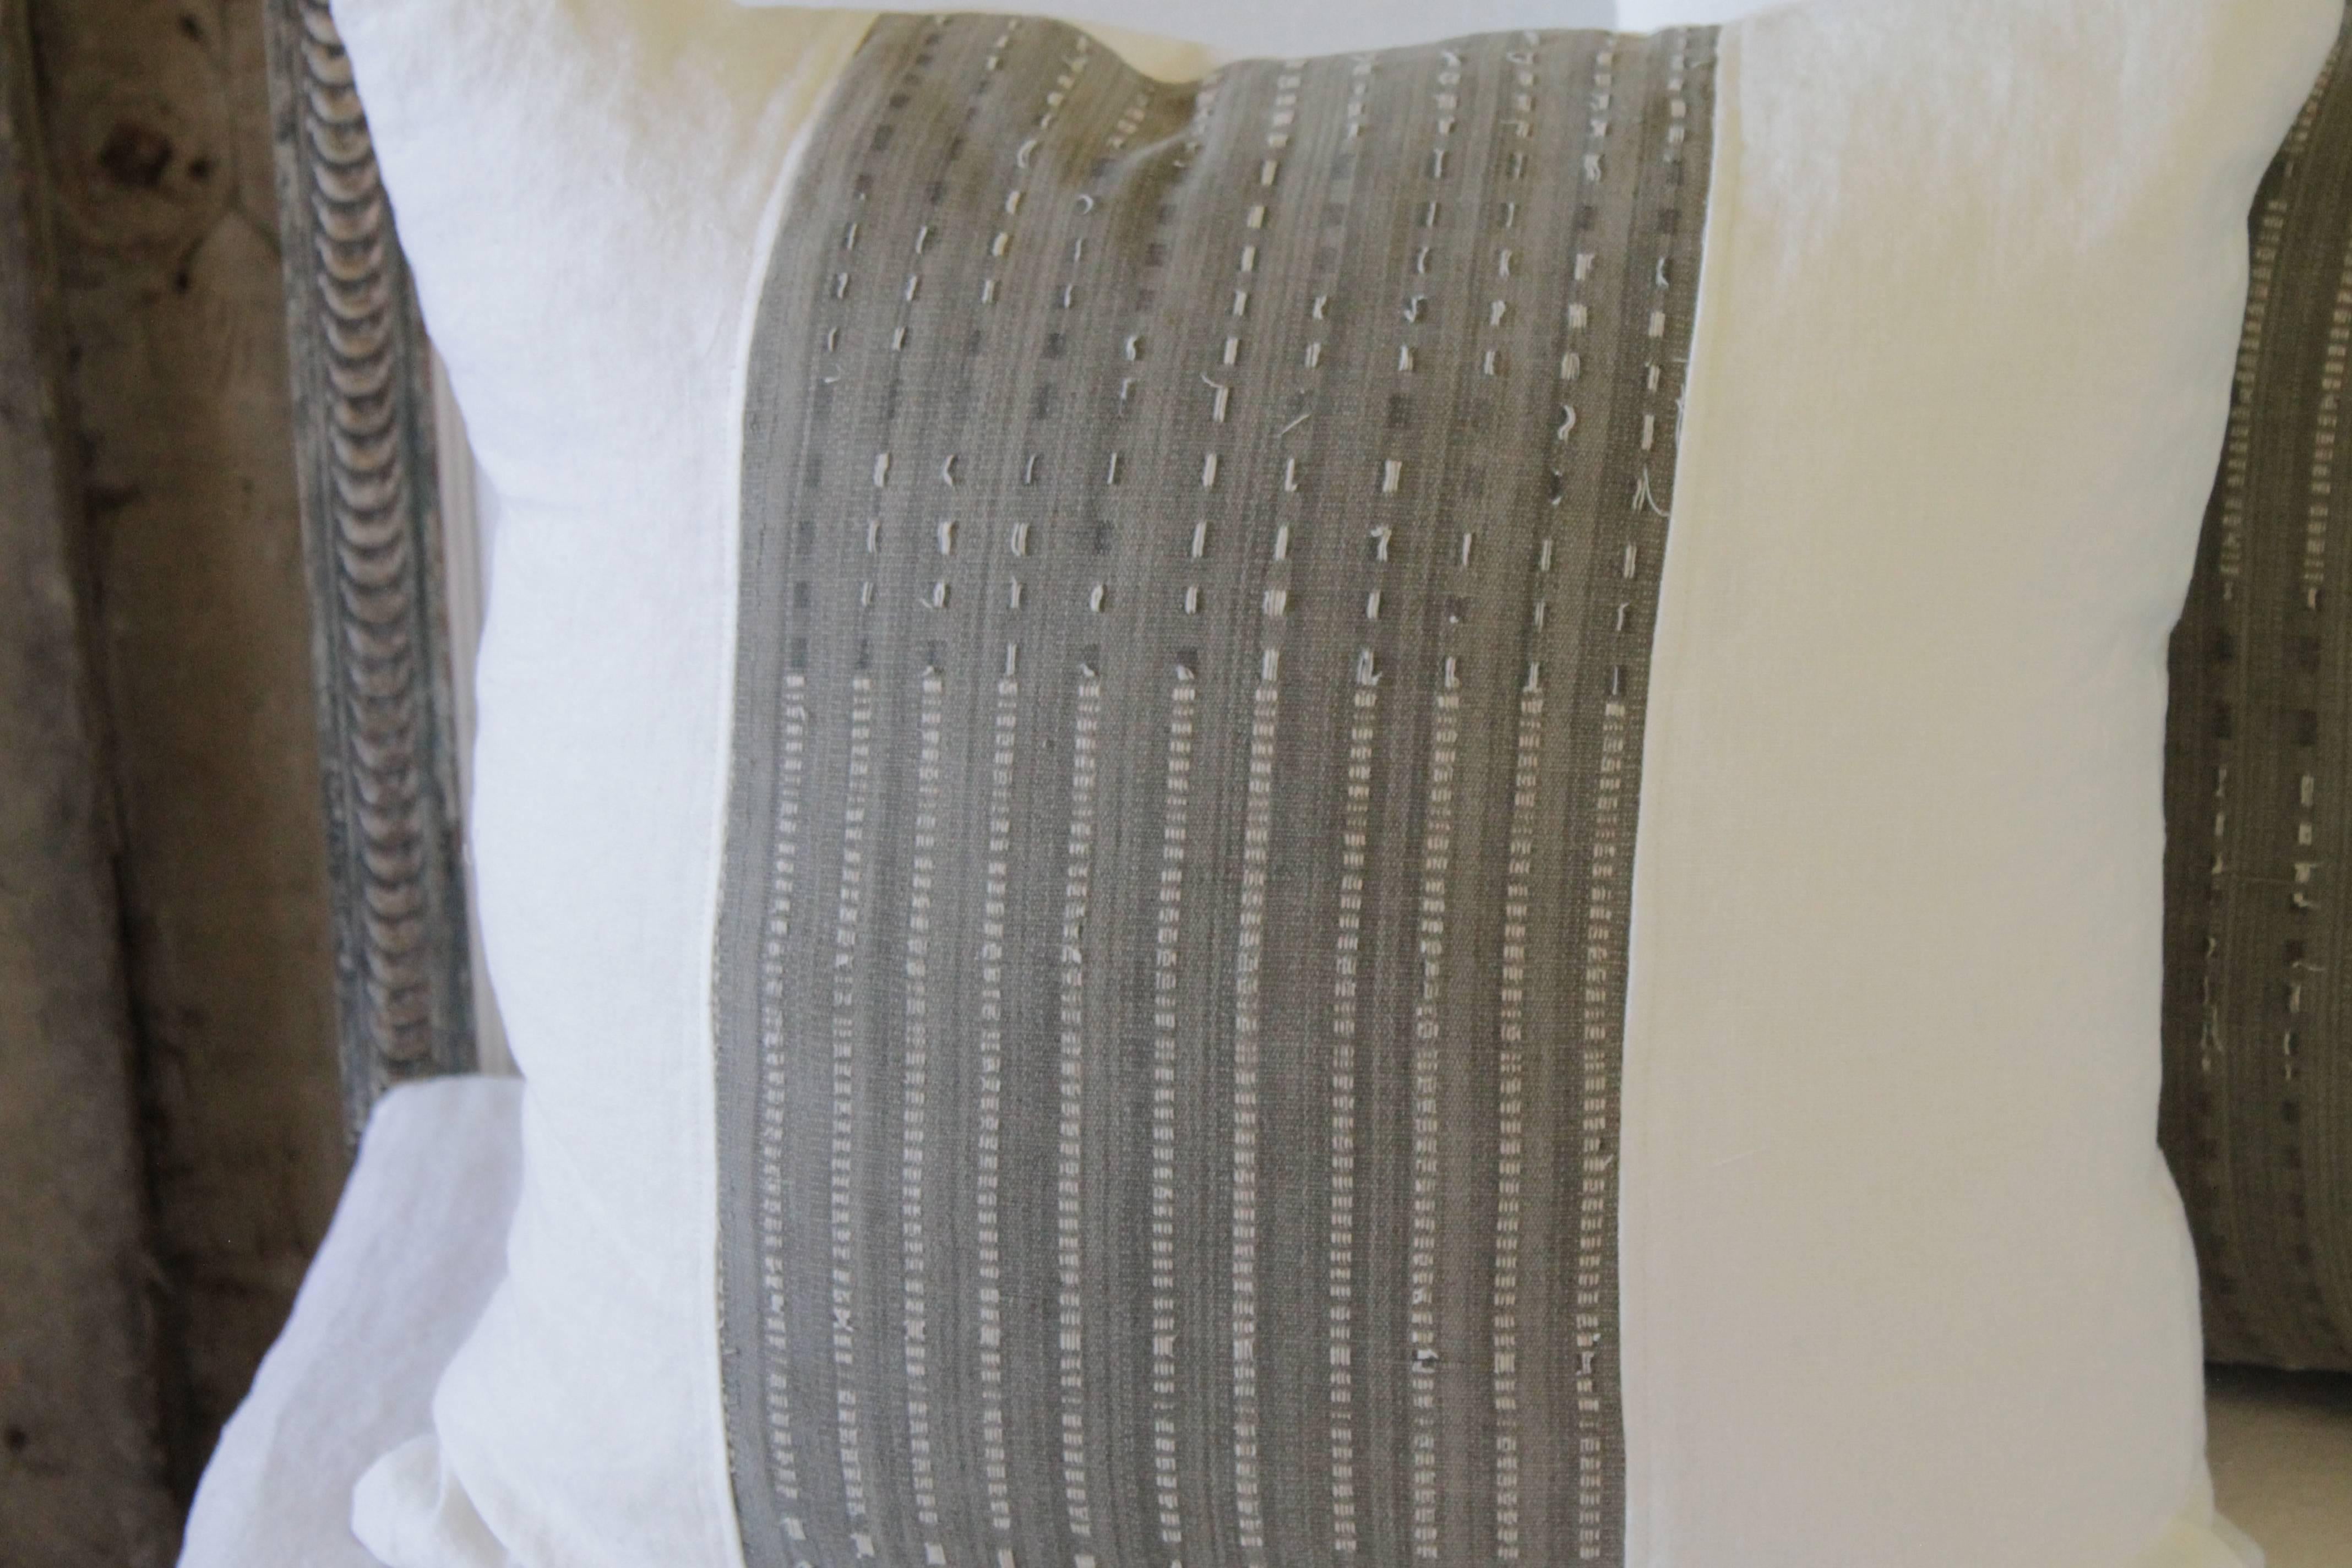 Pair of pillows made from a vintage textile know as an African mud cloth. This mud cloth is a grey soft woven cotton, with white threads woven through to create a beautiful pattern. As shown some threads have a tat edge. We have created this color